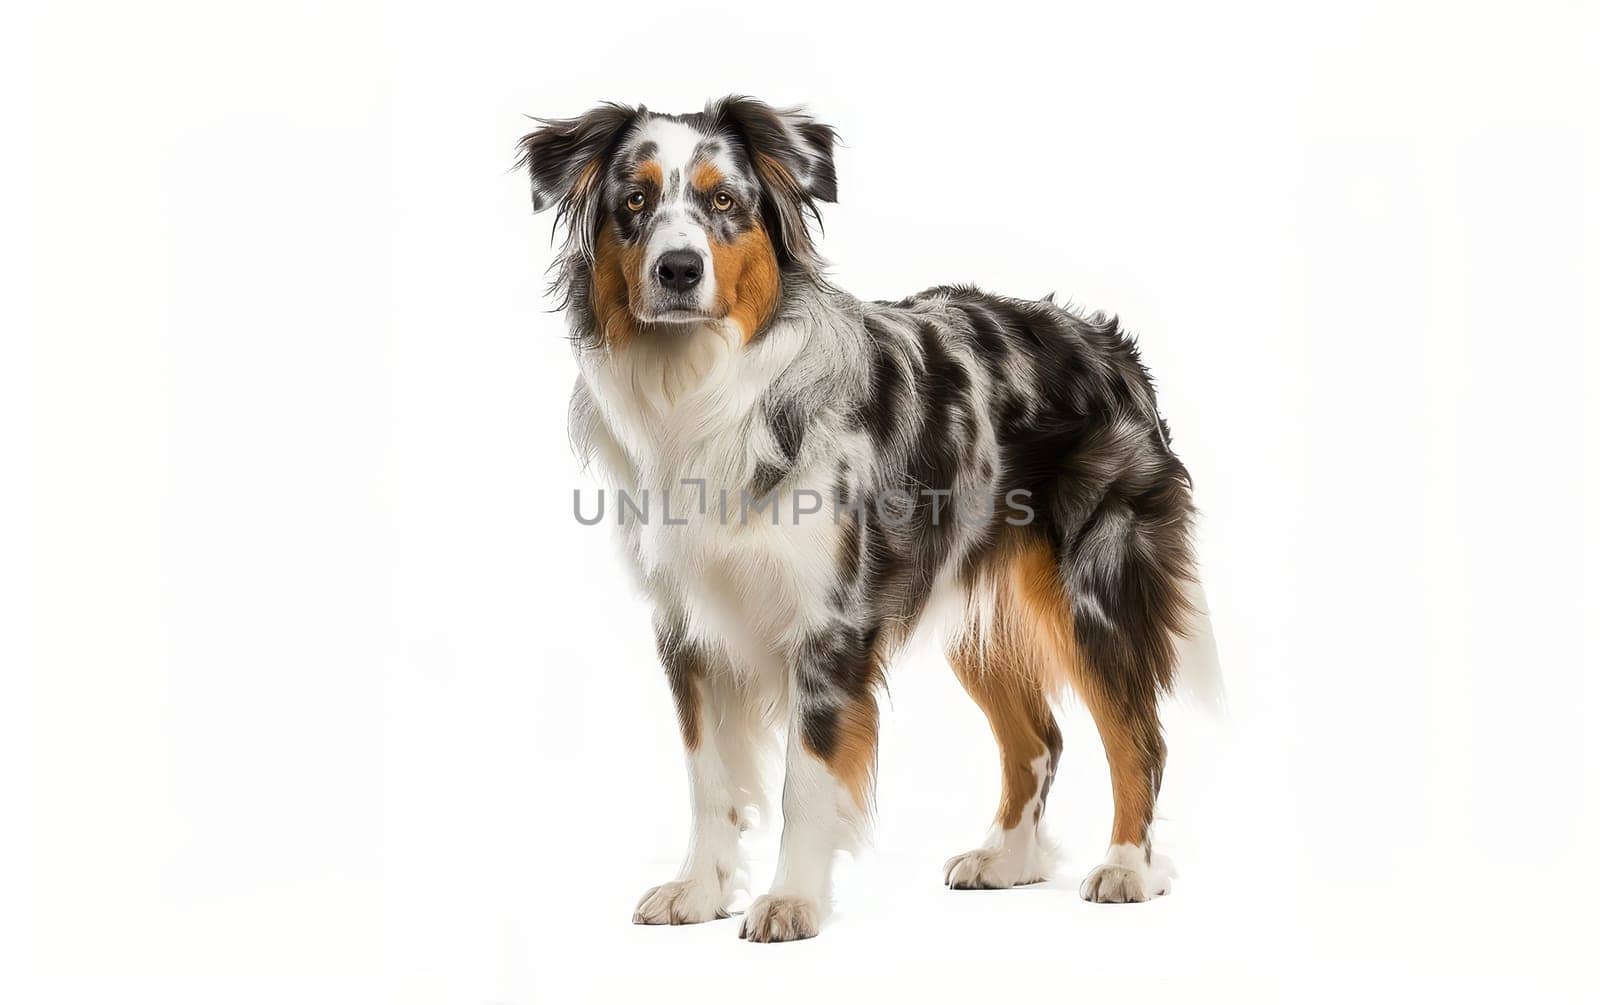 A majestic Australian Shepherd stands poised, its merle coat and attentive eyes indicative of its alert and active nature. The dog's stance displays confidence and readiness